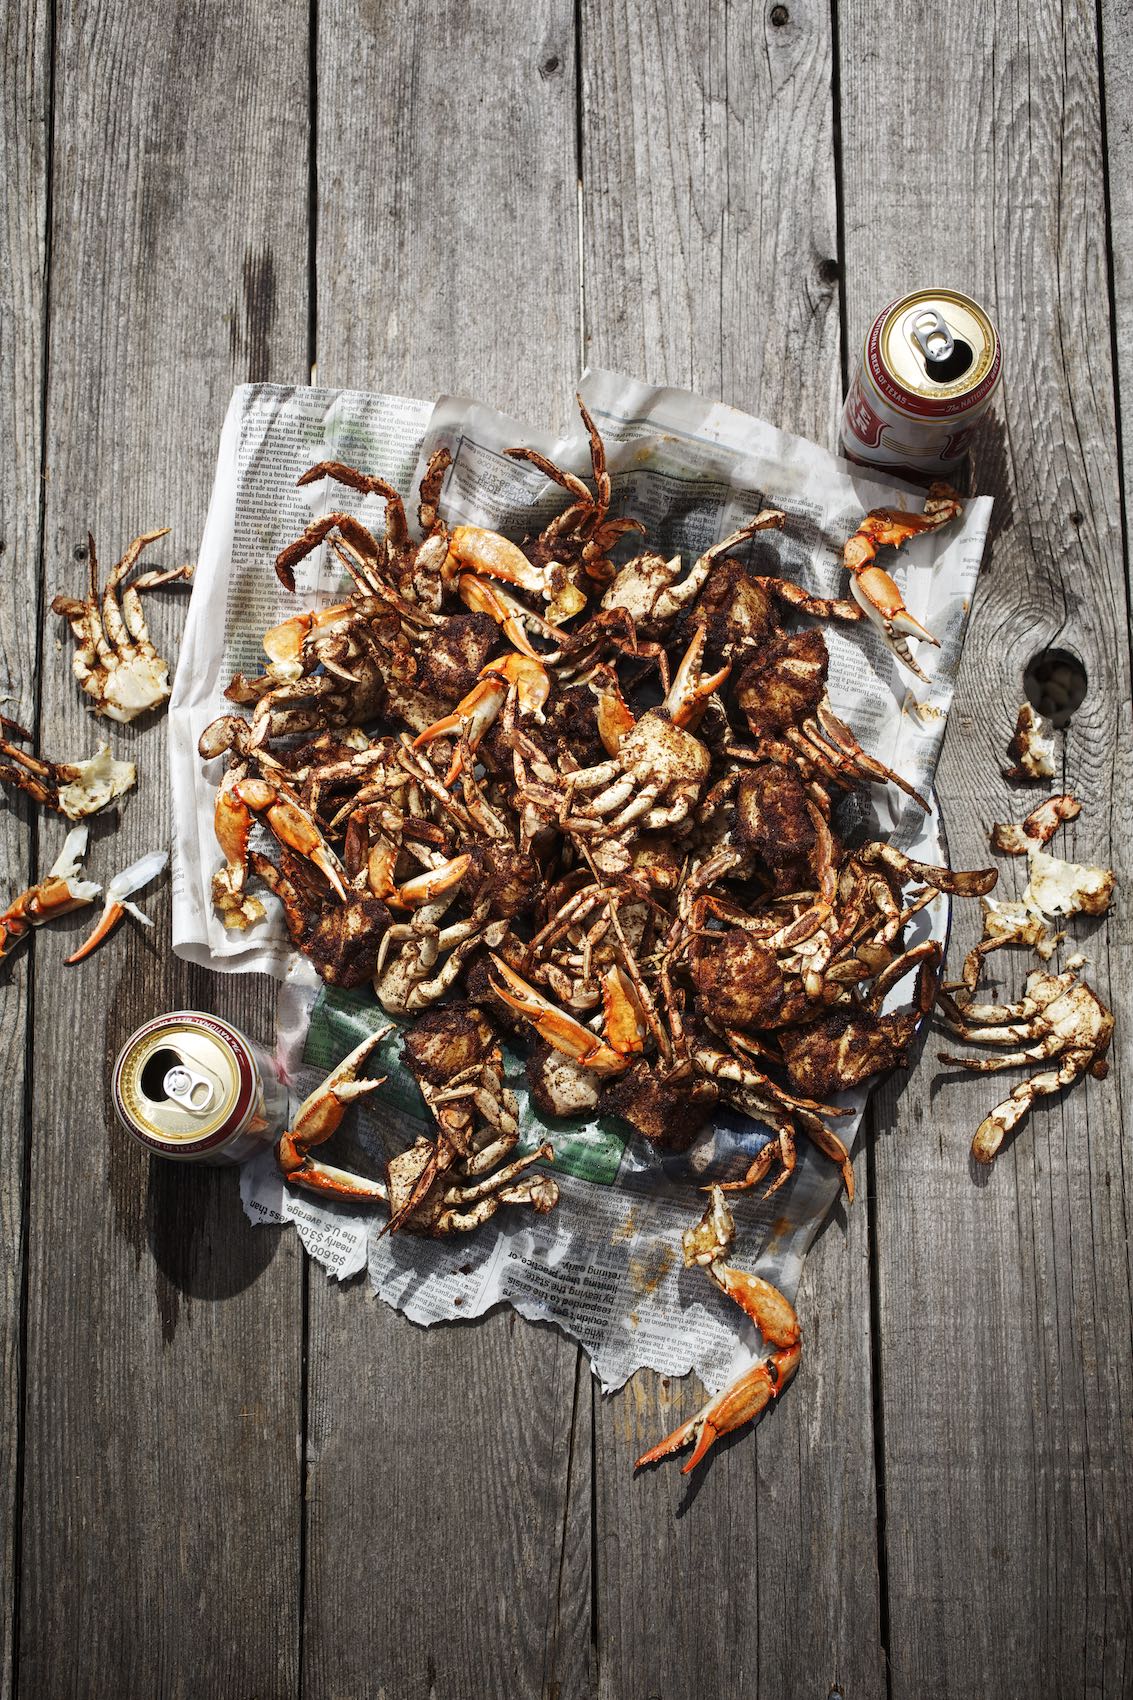 Jody Horton Photography - Crab claws and Lonestar on newspapers, on a wood surface. 